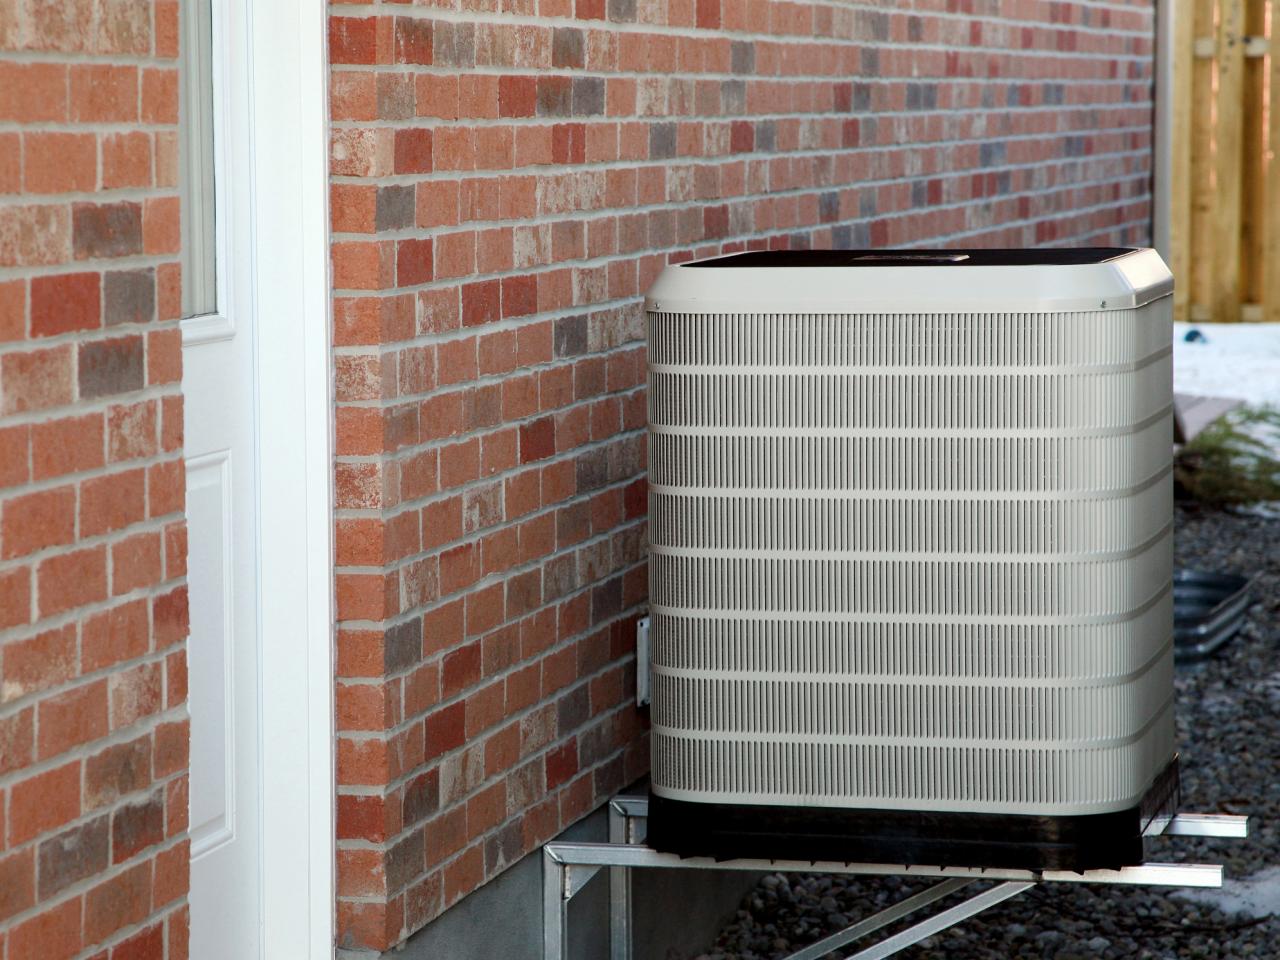 Where can heat pumps be purchased?